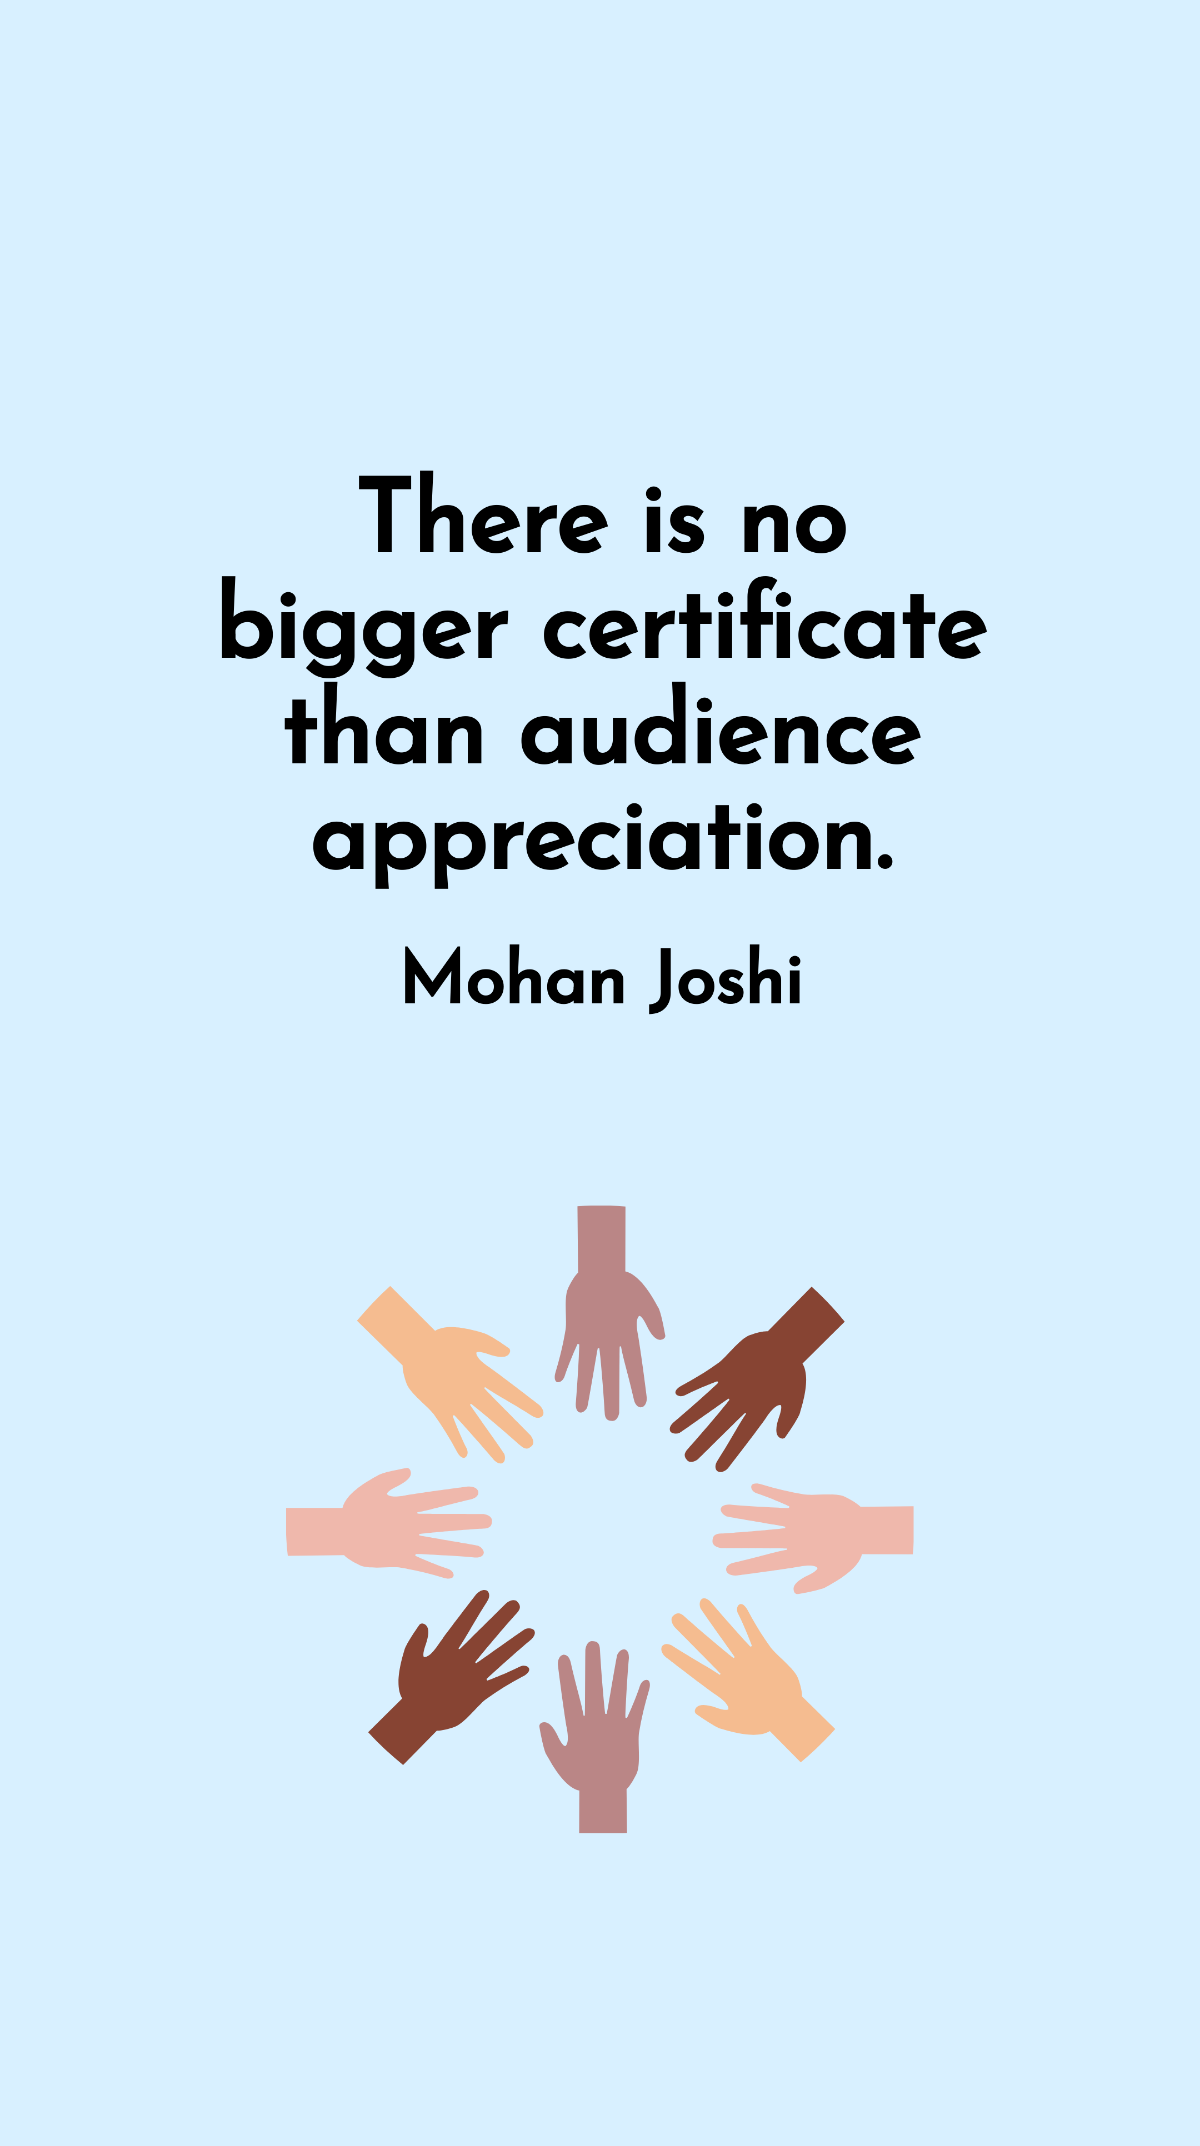 Mohan Joshi - There is no bigger certificate than audience appreciation.